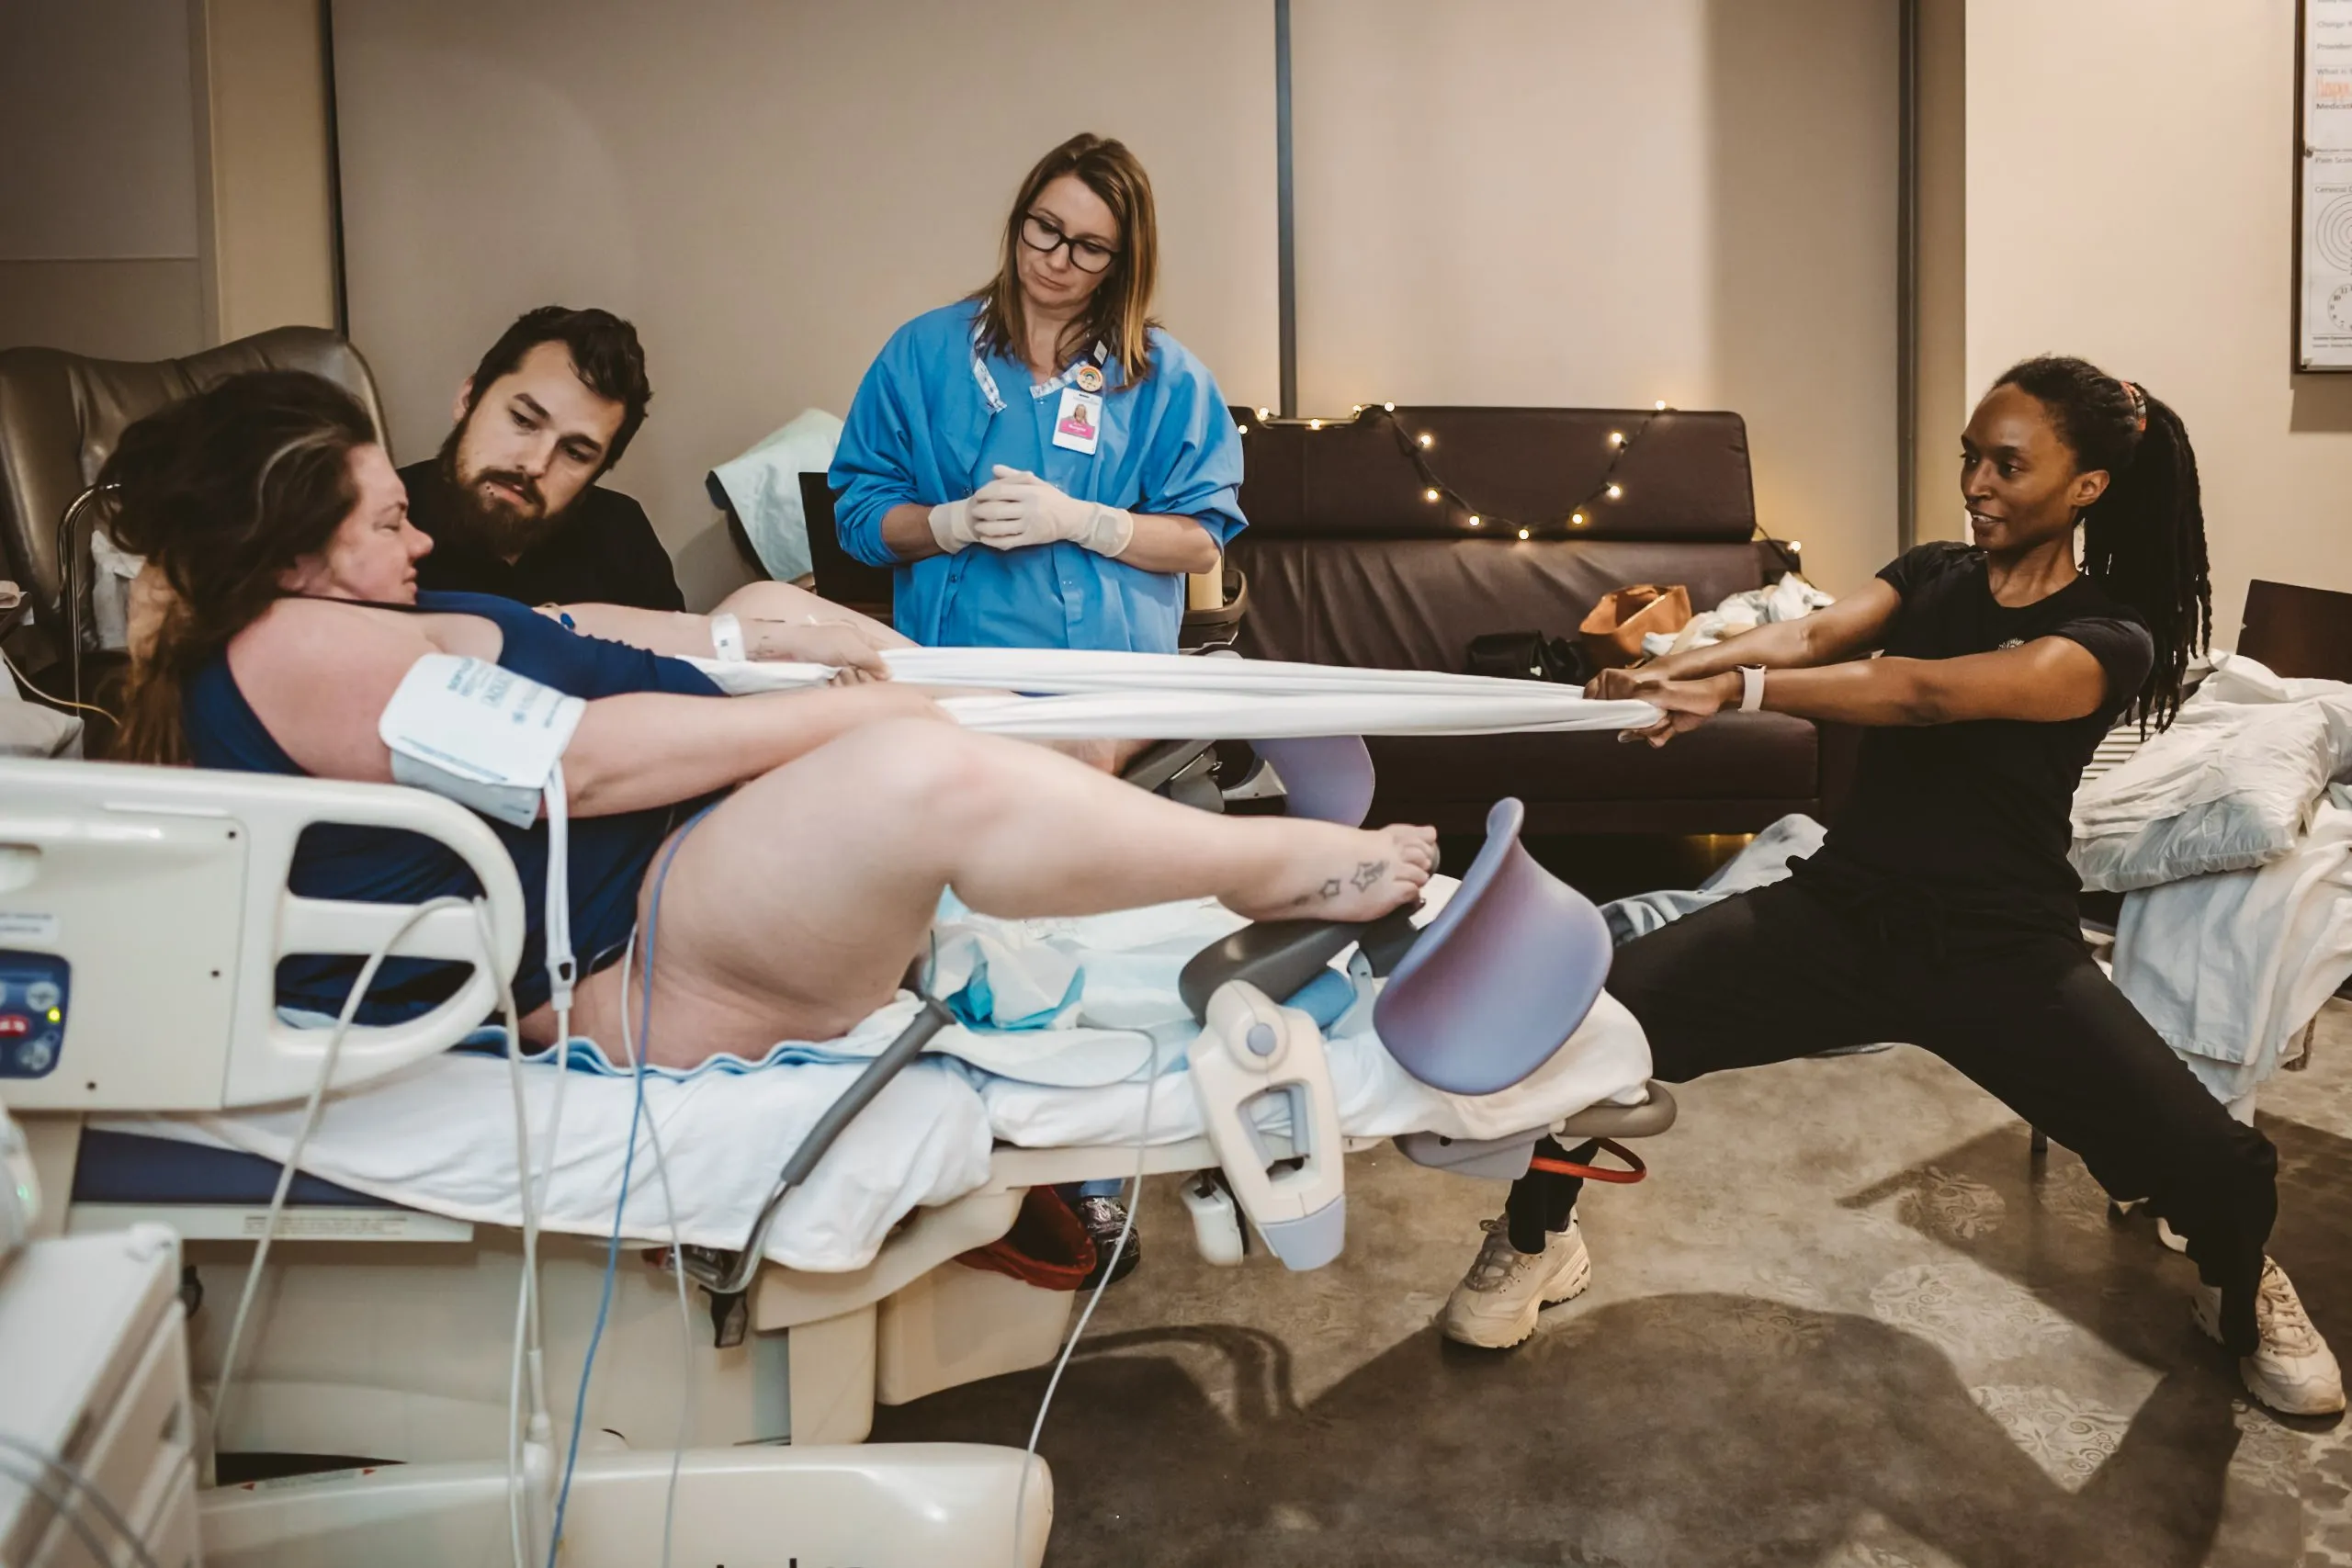 Image of doula assisting client during pushing phase of labor. Photo by Colorado Springs Birth Photographer Danica Donnelly